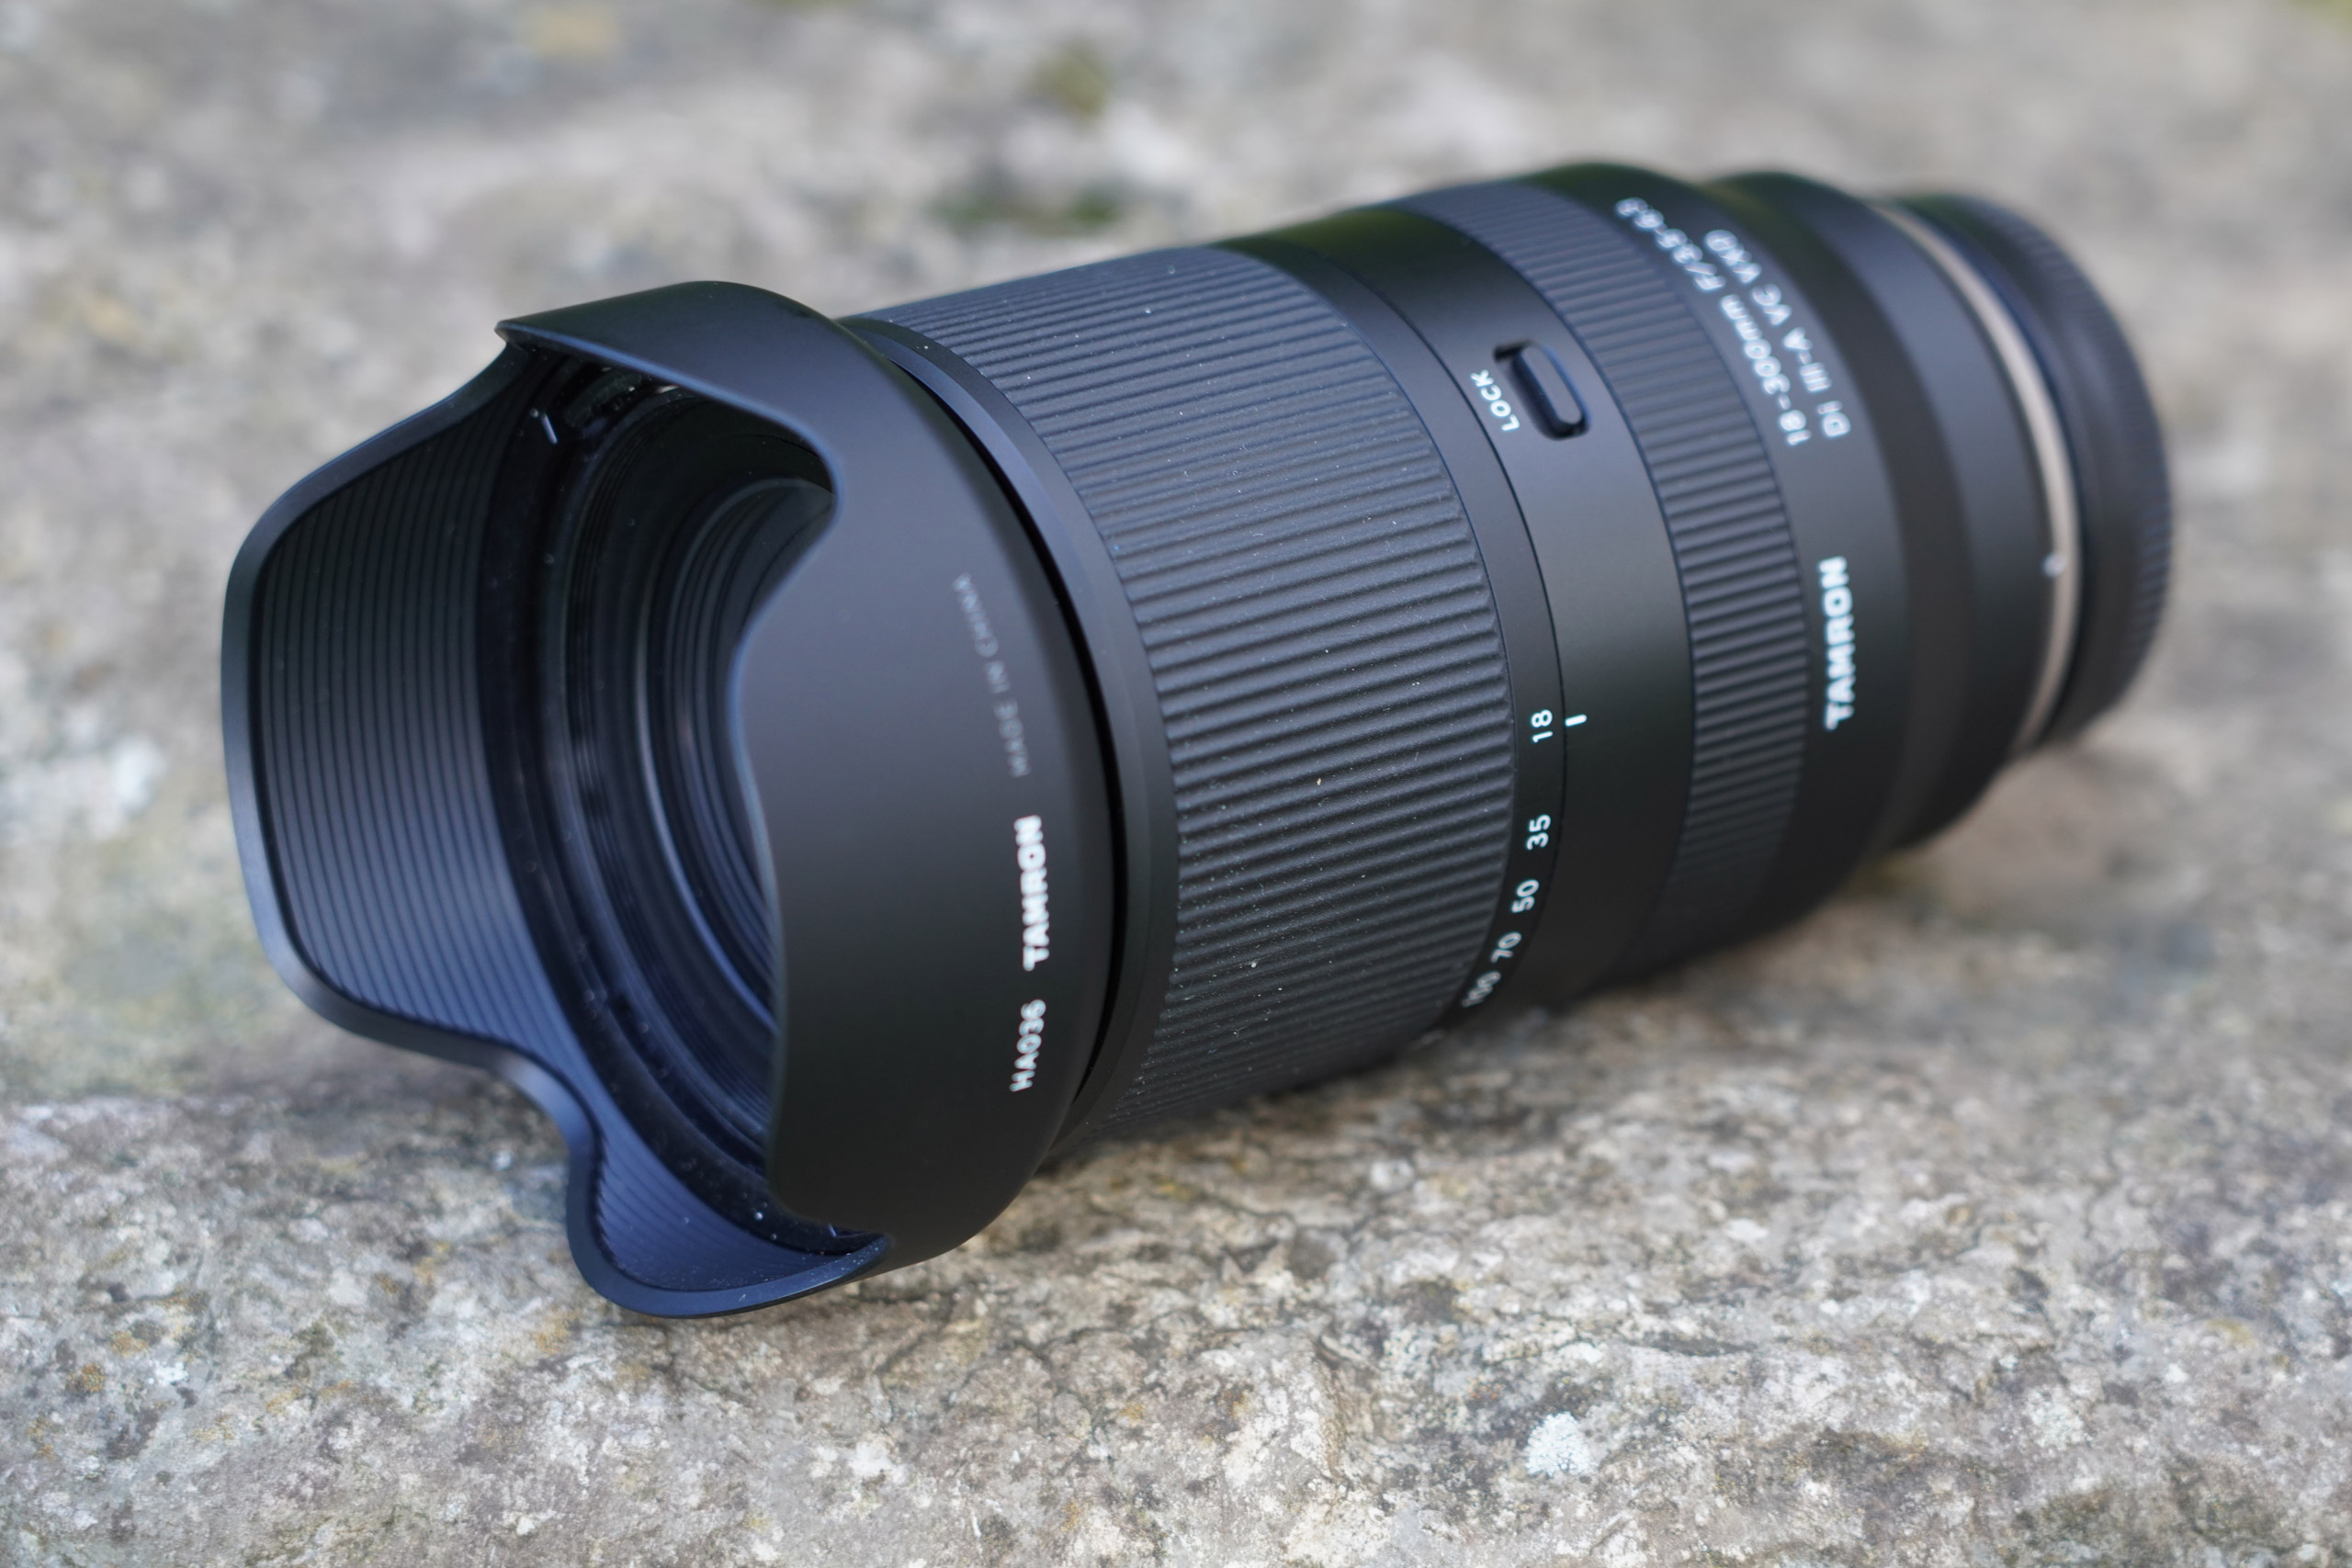 Tamron 18-300mm f3.5-6.3 lens with hood (E-Mount, X-Mount)